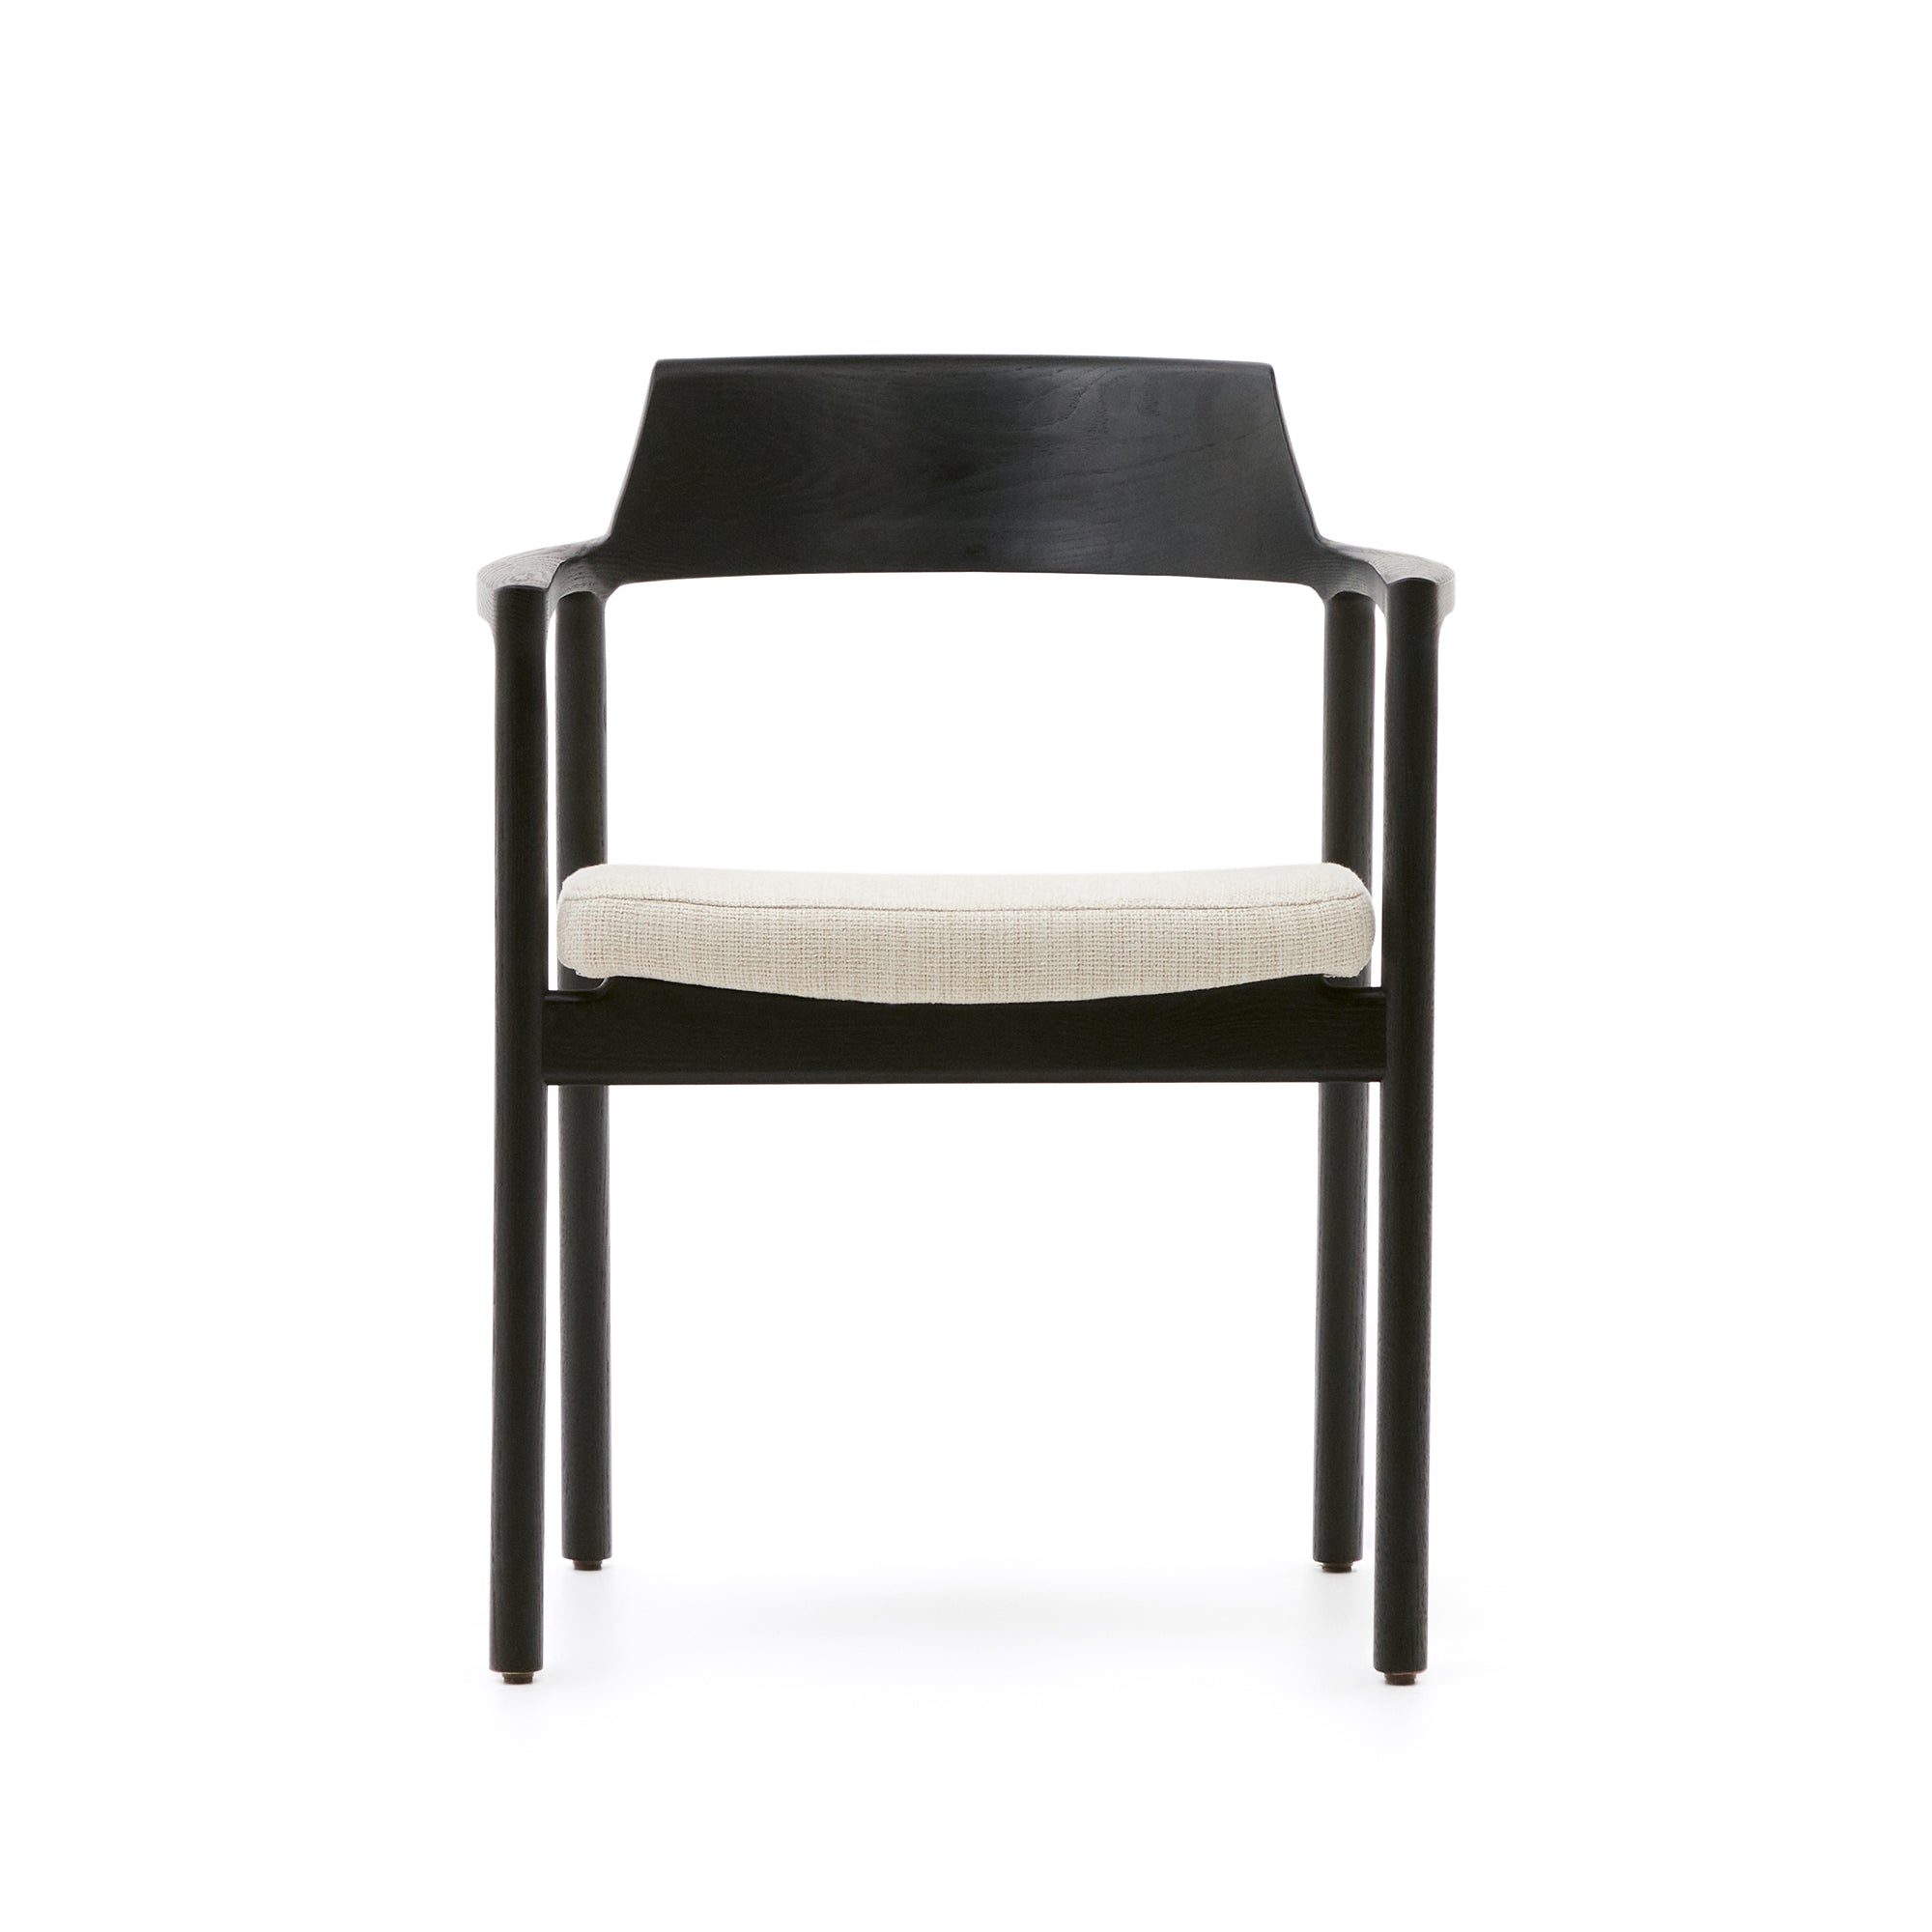 Low chair with removable cover in beige chenille, solid oak with black finish FSC Mix Credit